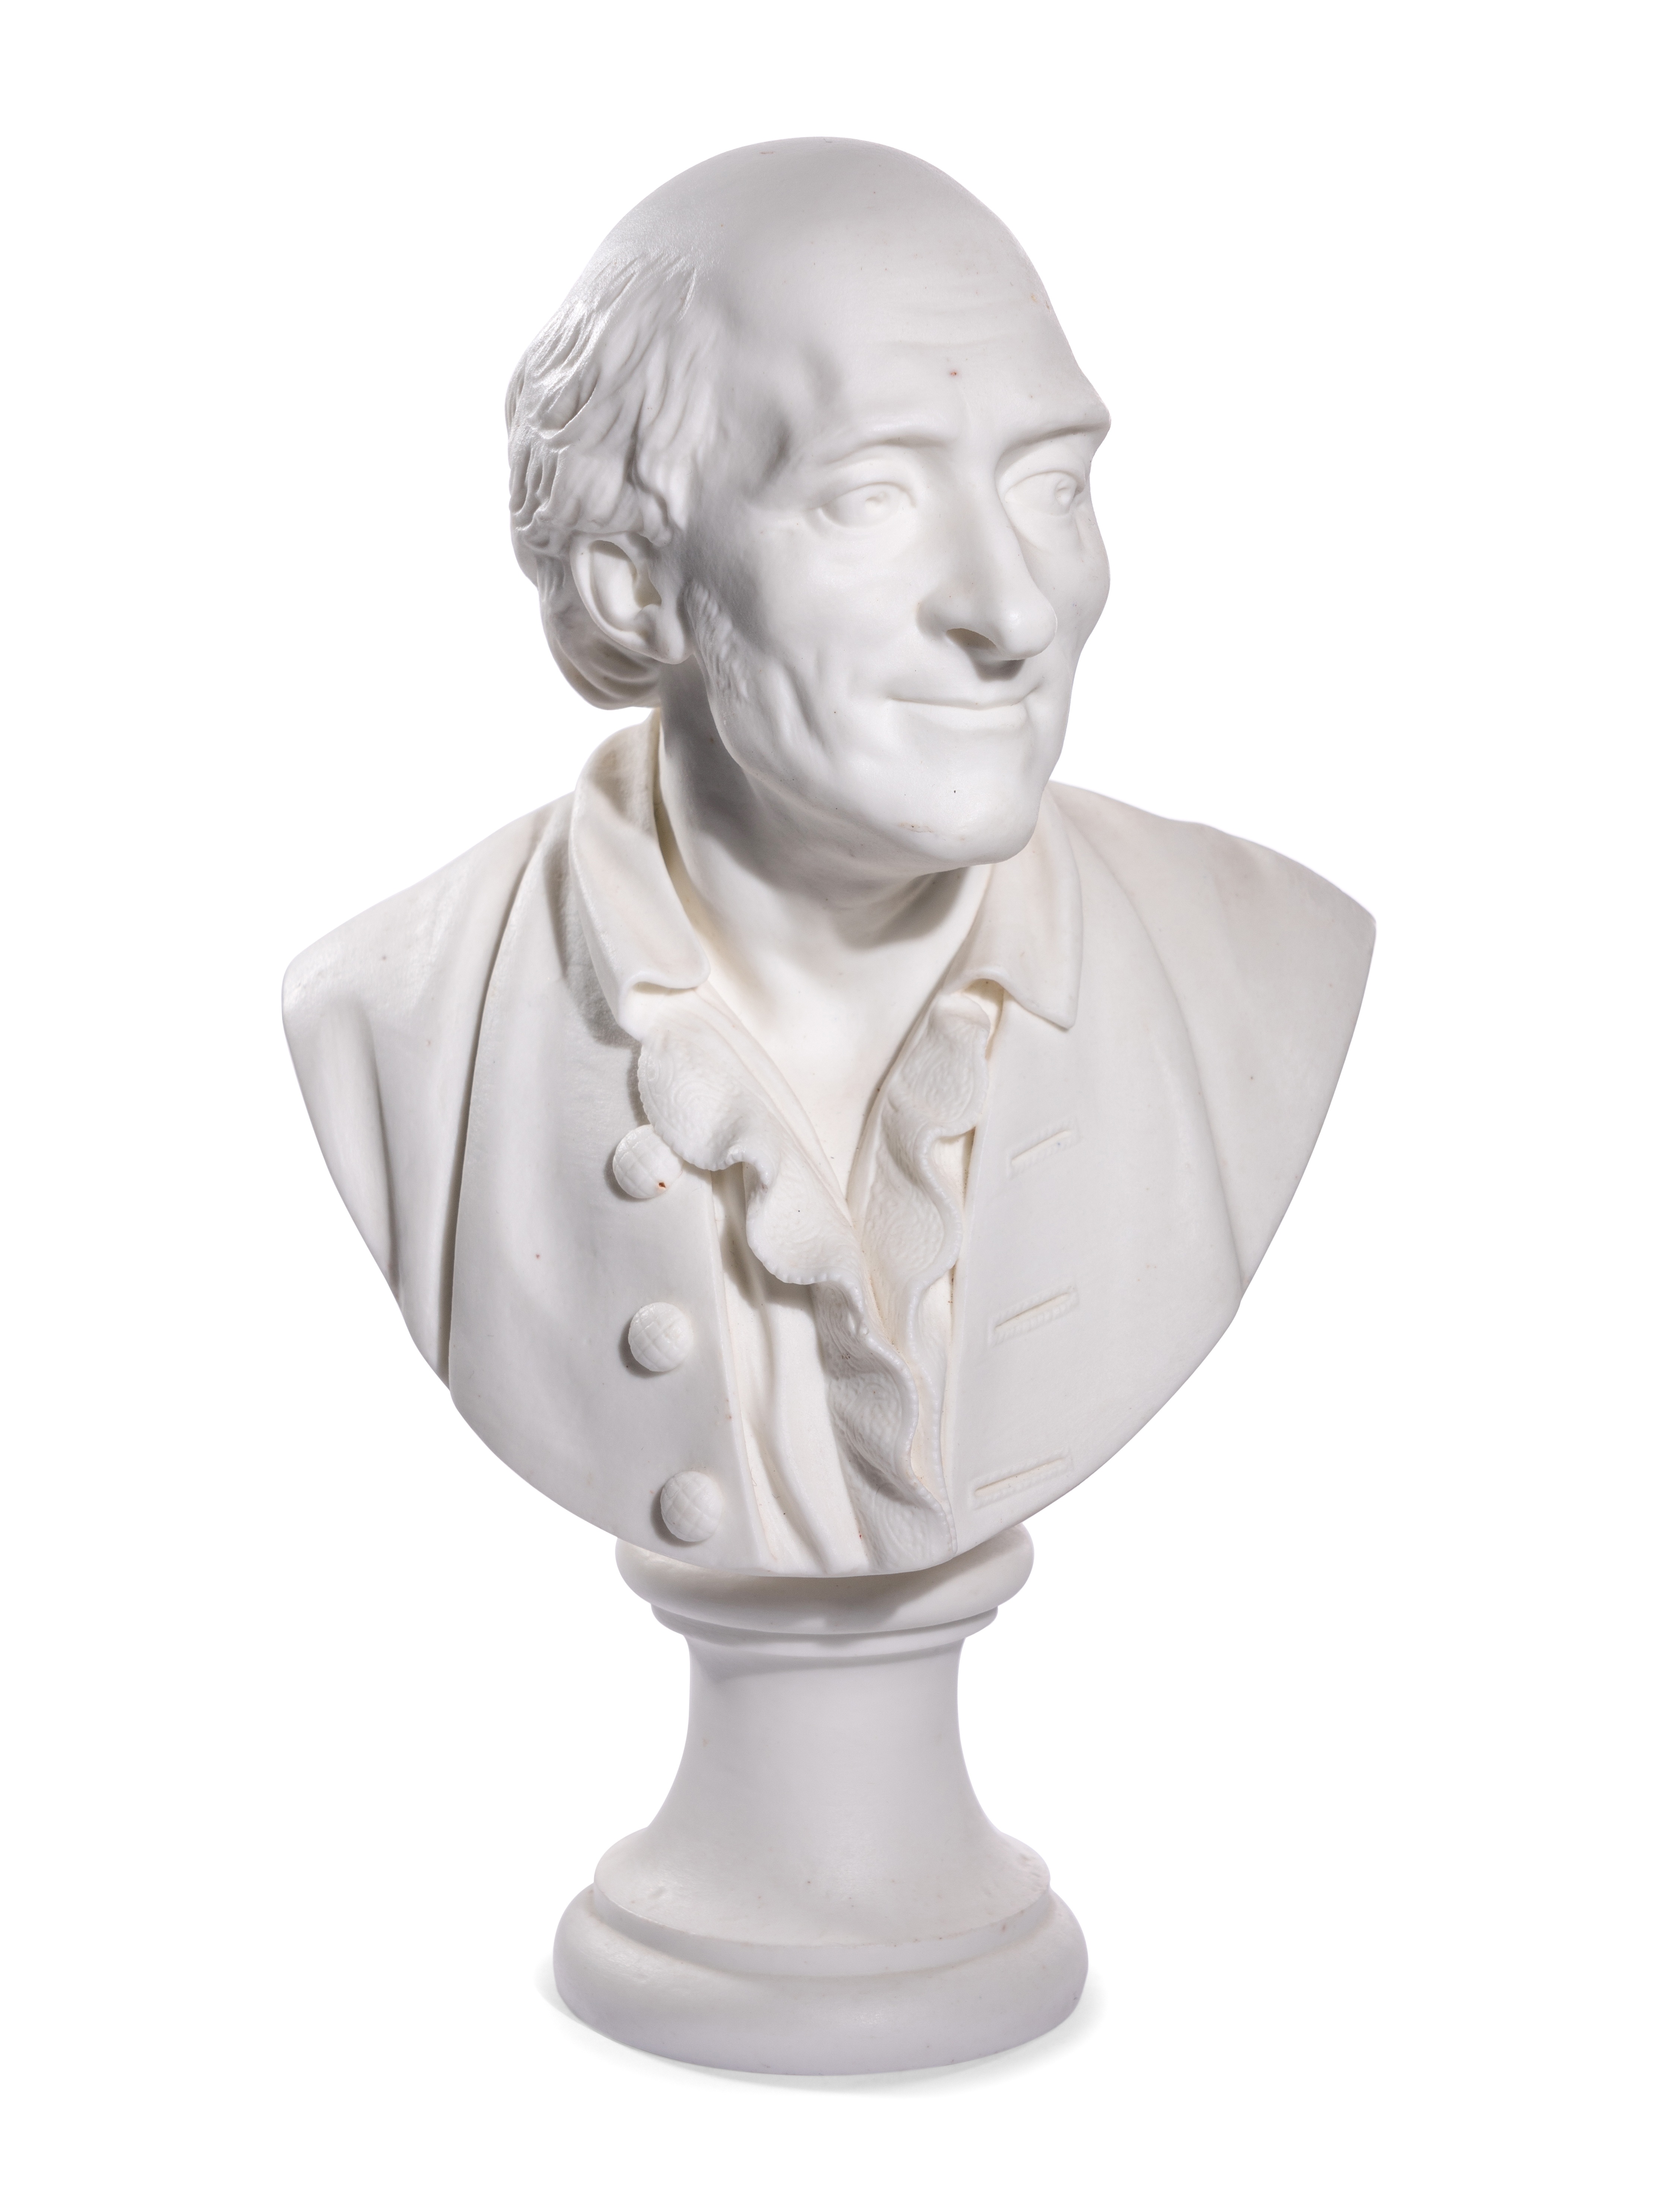 A French Biscuit Porcelain Bust of Fran'cois-Marie Arouet, Called Voltaire - Image 2 of 20